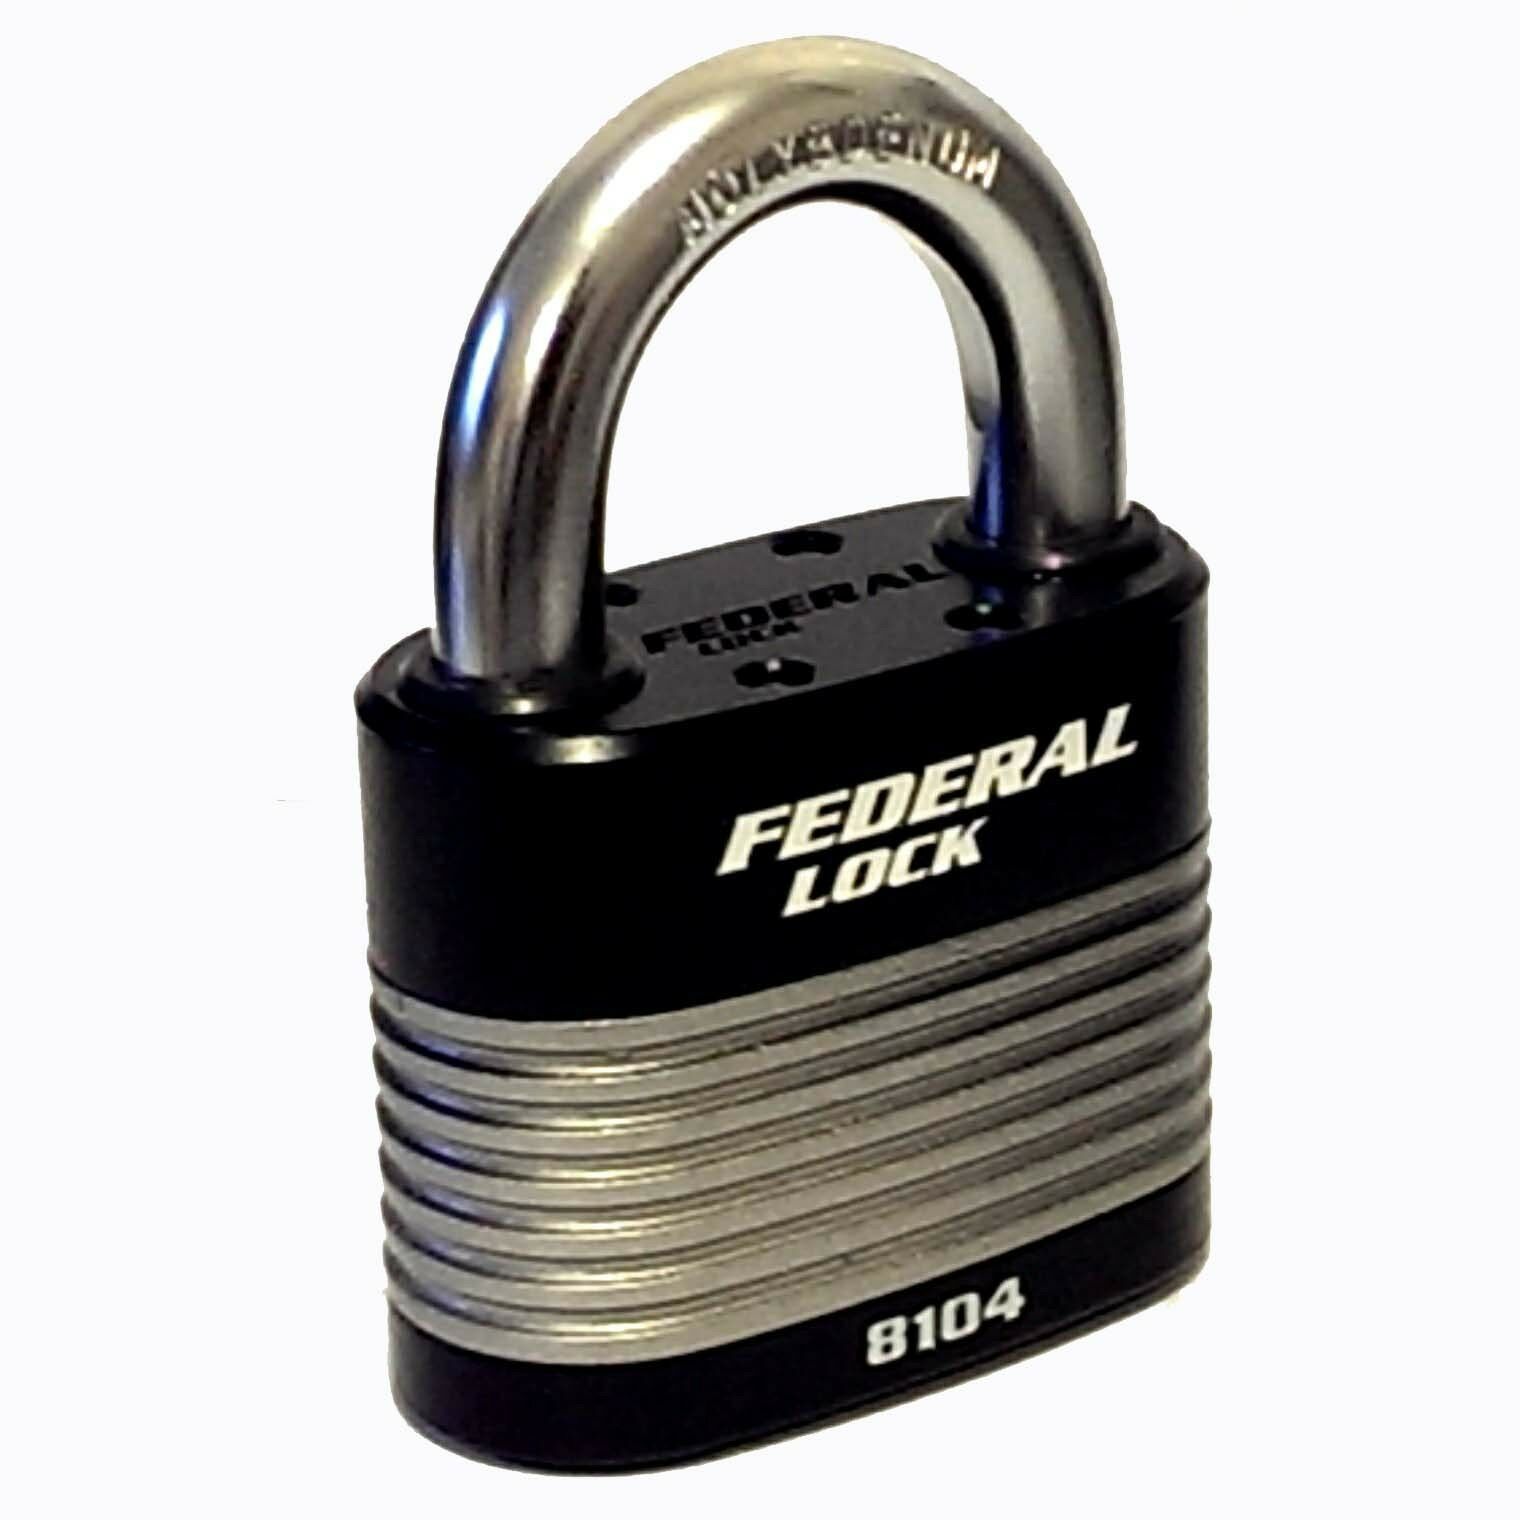 FEDERAL HIGH SECURITY VAN SHED GATE HASP STAPLE AND PADLOCK COMBO FD2025+FD8103 